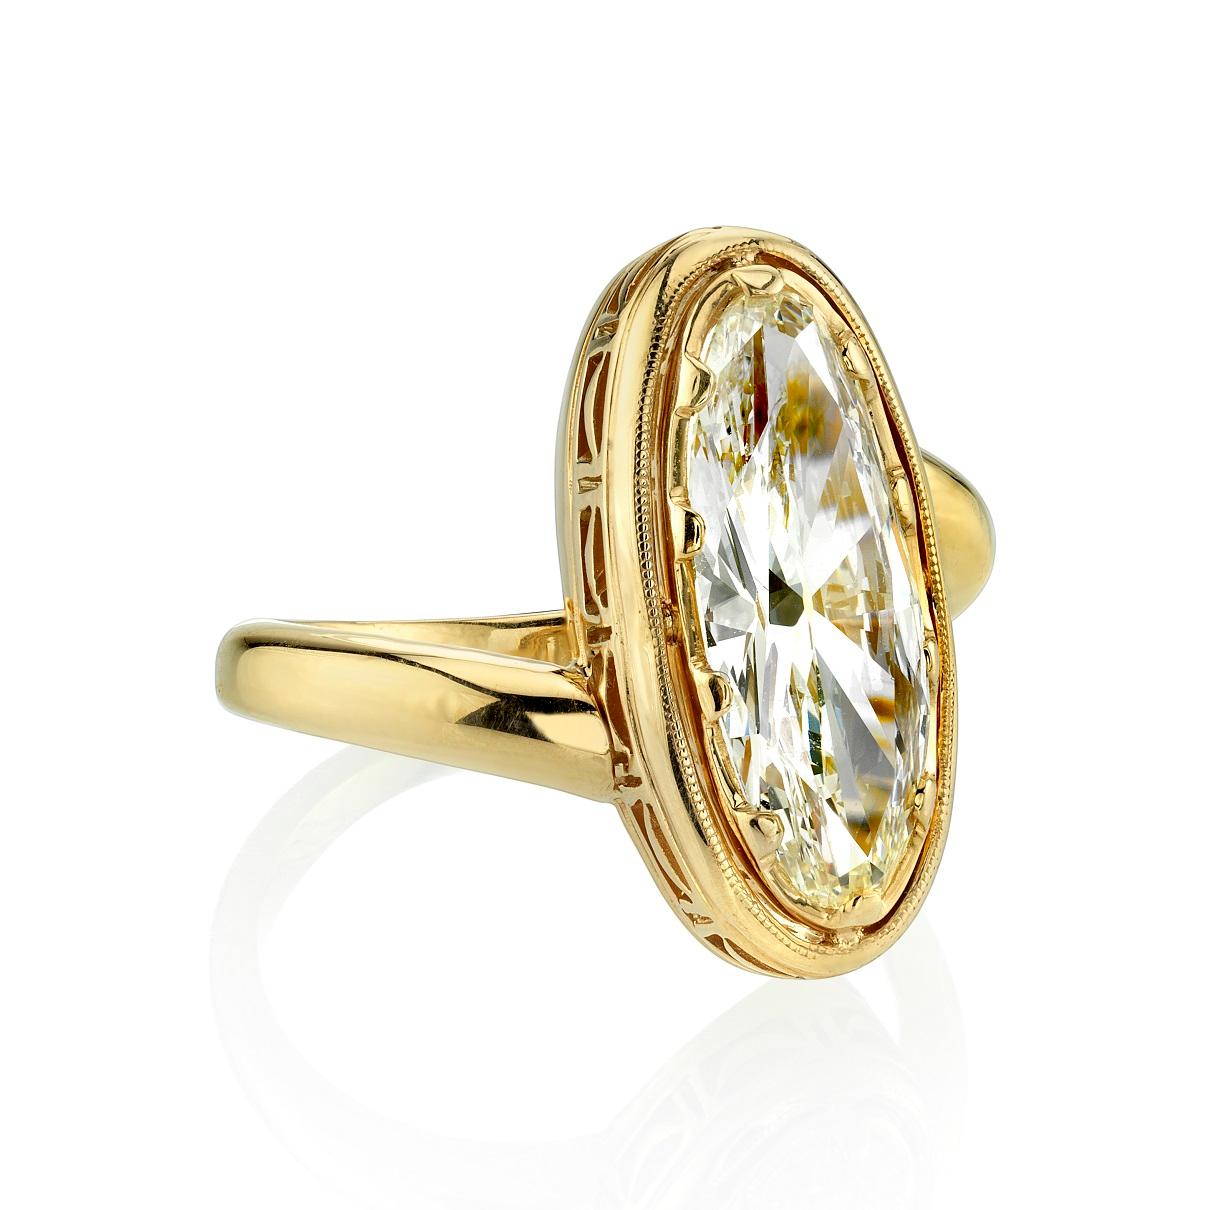 2.57ct L/VS1 EGL certified vintage Moval cut diamond set in a handcrafted 18k yellow gold mounting. This beautiful ring sits very low profile and offers a lot of finger coverage. This stunning vintage moval is very uniqeu. While the weight is